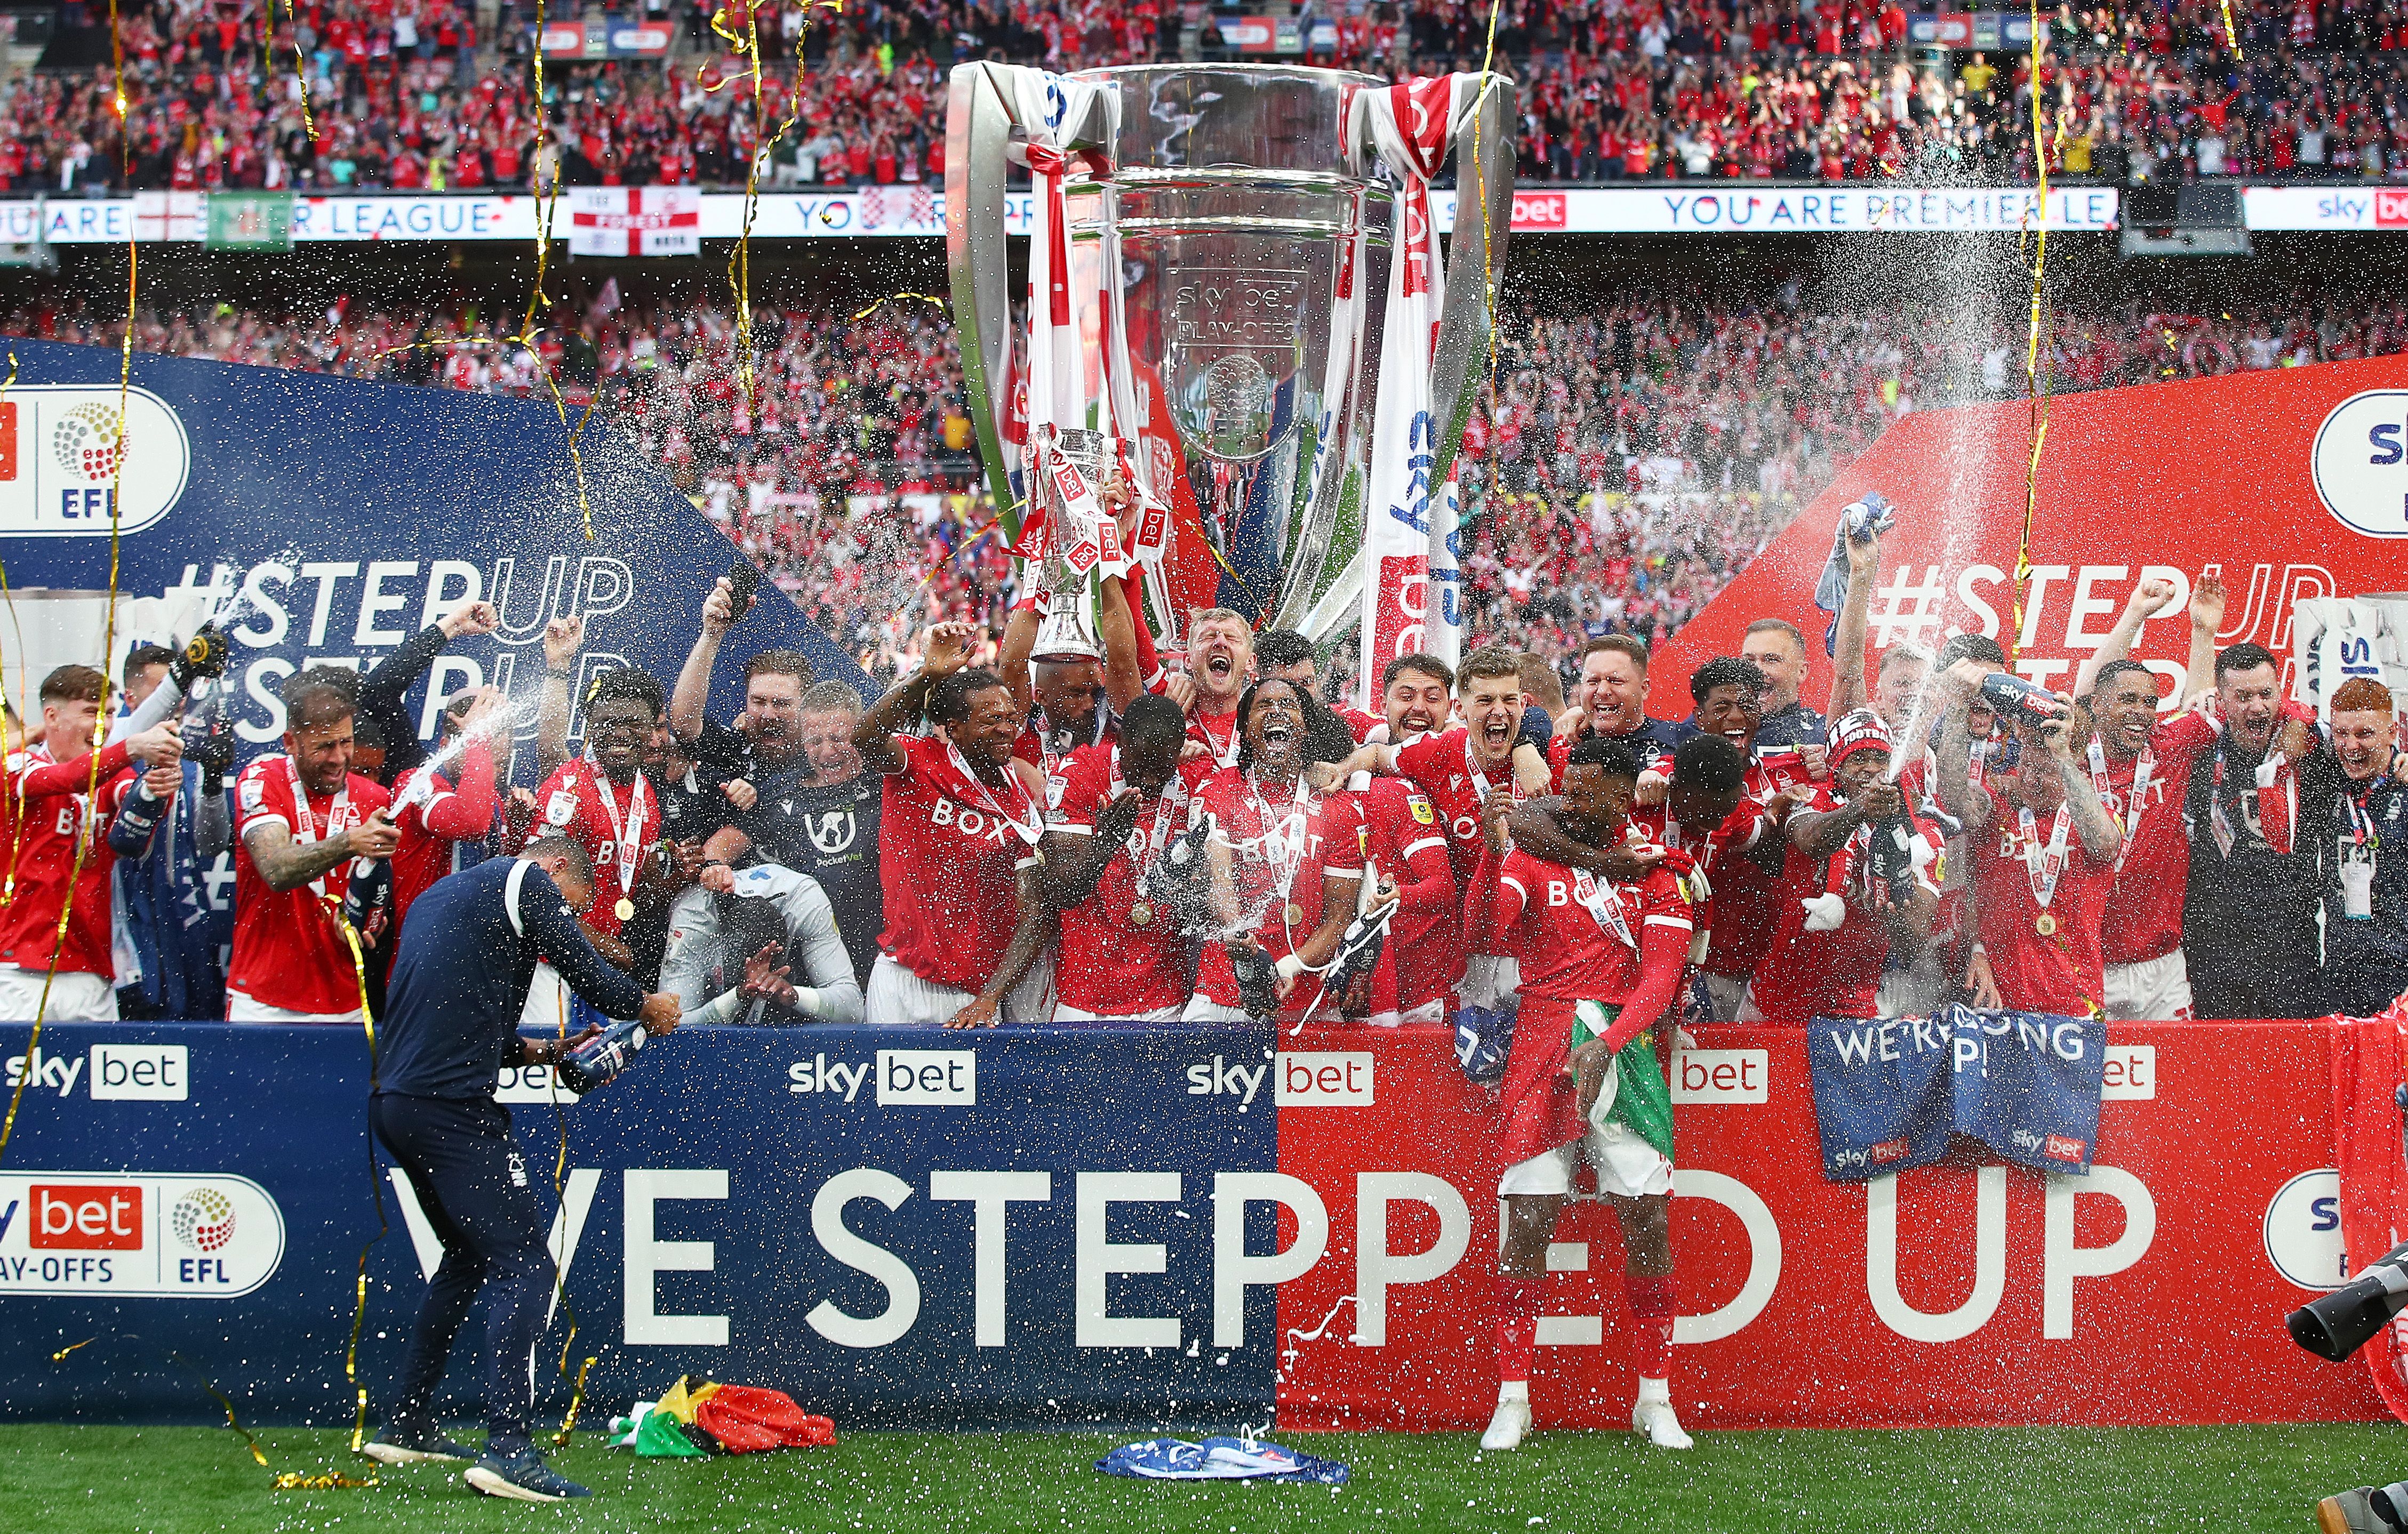 Lewis Grabban of Nottingham forest lifts the trophy following their team's victory in the Sky Bet Championship Play-Off Final match between Huddersfield Town and Nottingham Forest at Wembley Stadium on May 29, 2022 in London, England.